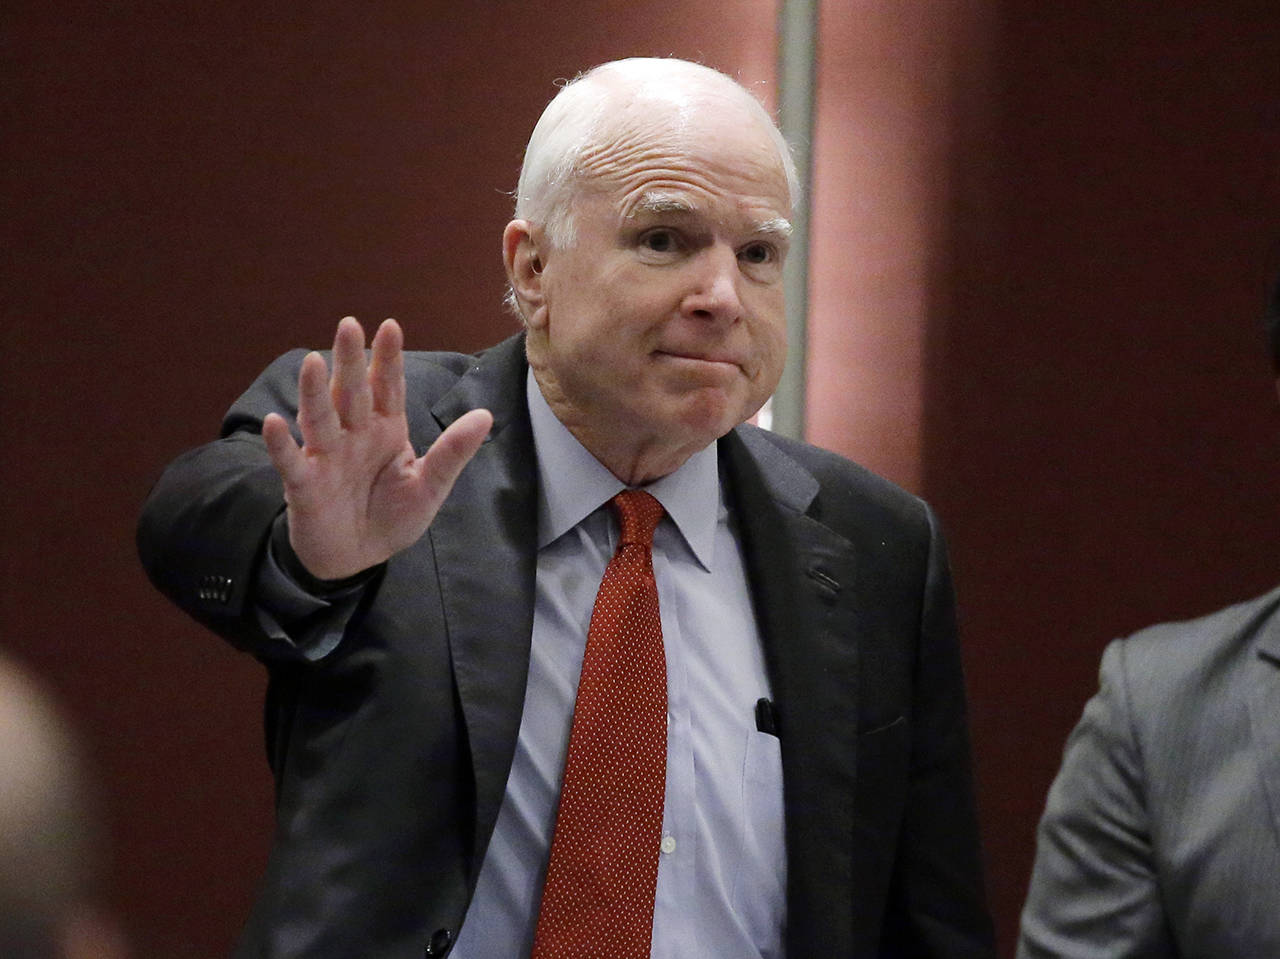 In this June 3, 2016, photo, Sen. John McCain greets the audience as he arrives to deliver a speech in Singapore. McCain, the war hero who became the GOP’s standard-bearer in the 2008 election, died Saturday, Aug. 25, 2018. He was 81. (AP Photo/Wong Maye-E, File)